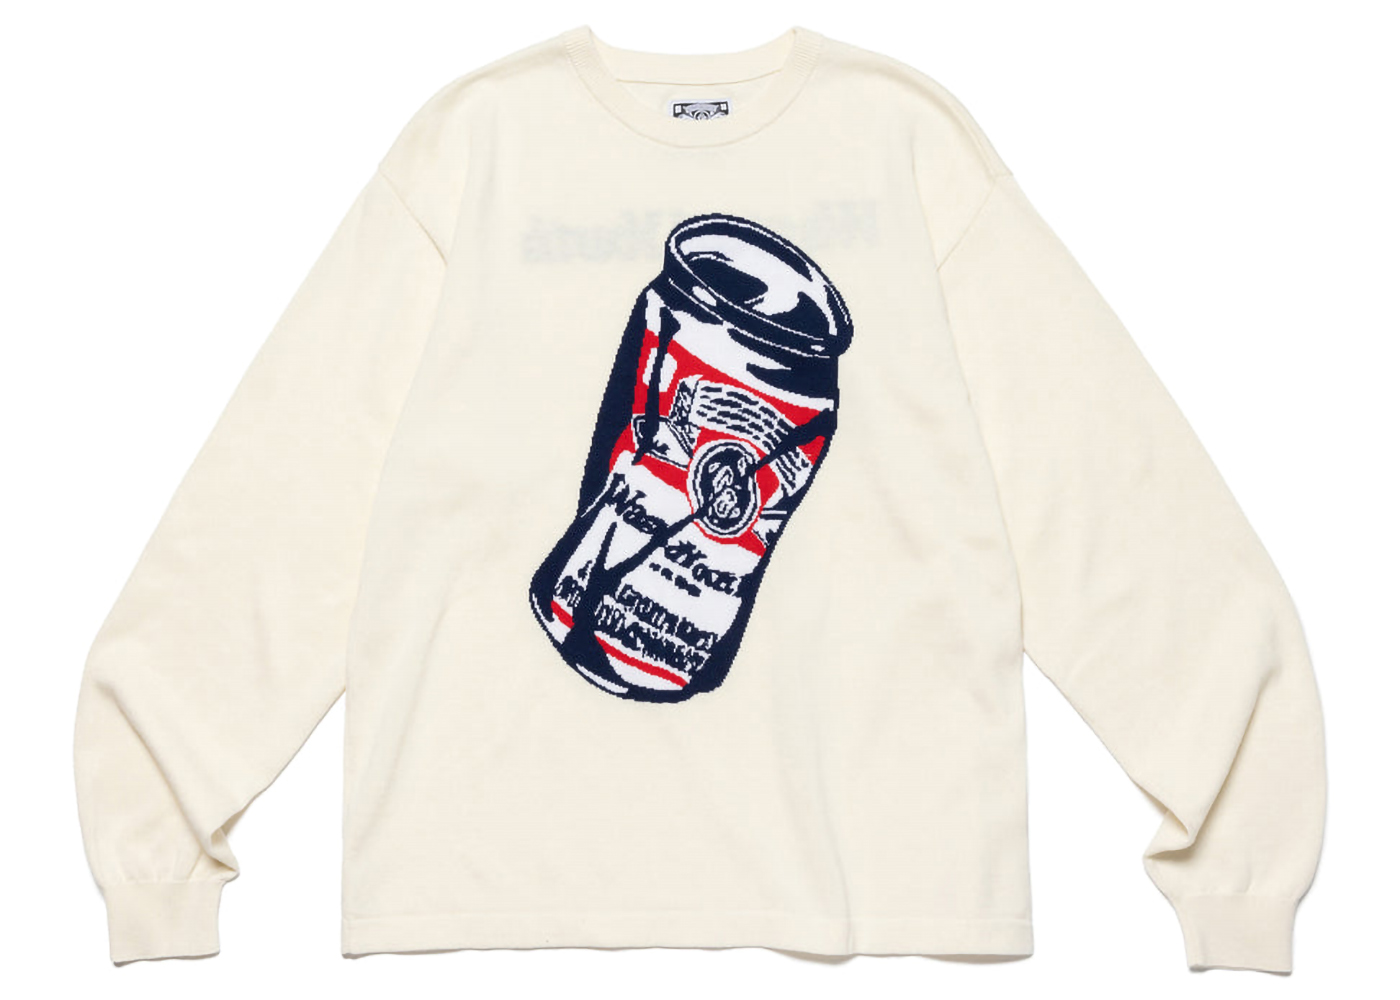 Wasted Youth Knit #2 White L-